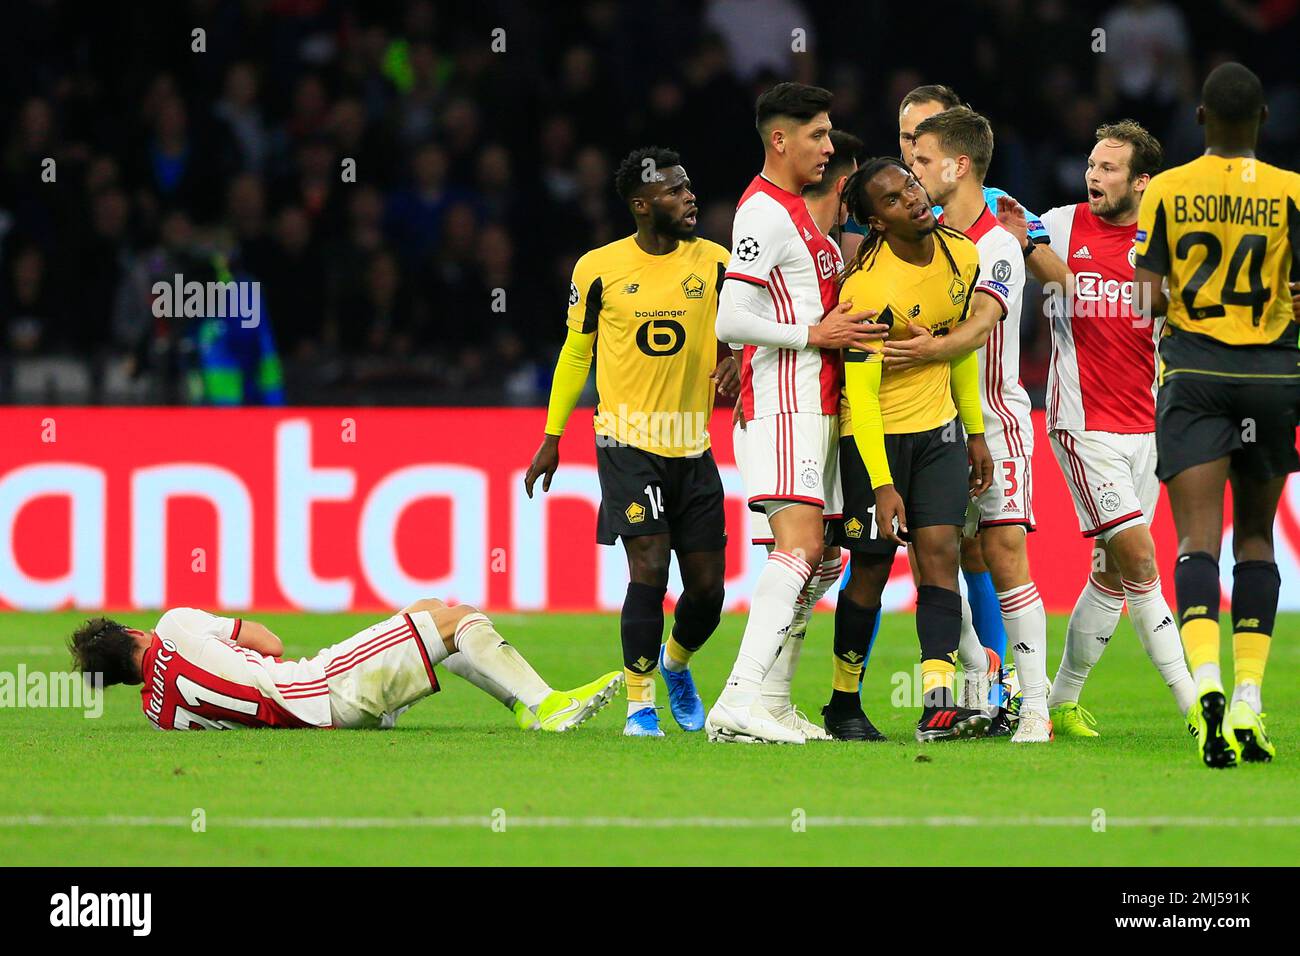 Lille's Renato Sanches, center, is led away after pushing Ajax's Dusan  Tadic, left, to the ground during the group H Champions League soccer match  between Ajax and LOSC Lille at Johan Cruyff